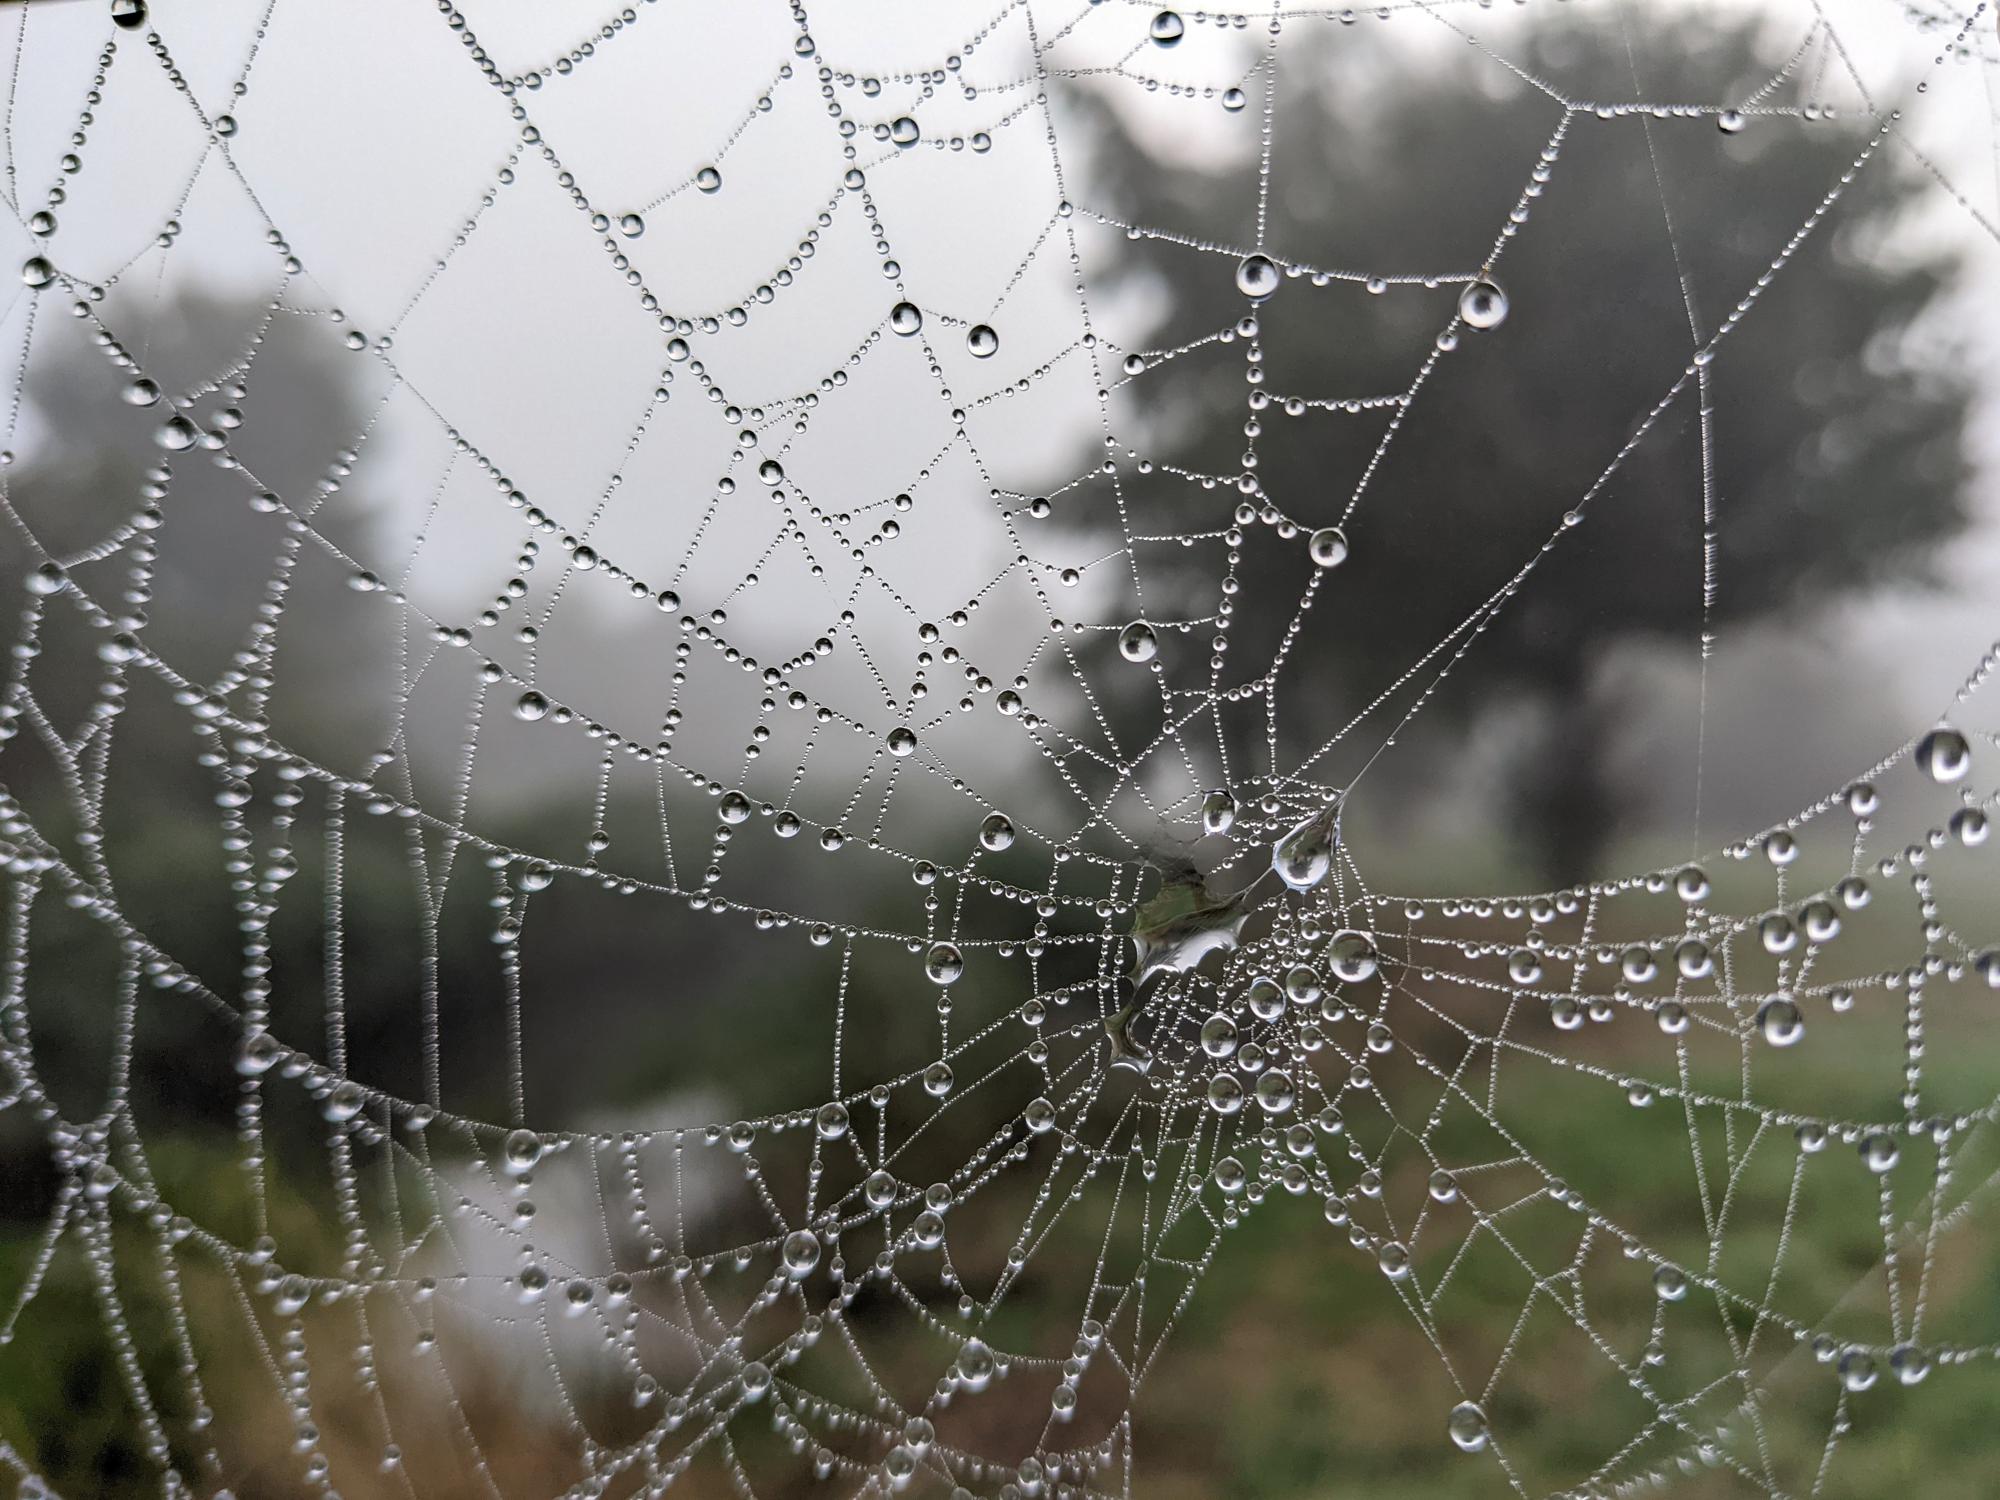 Foggy spiderweb with background of trees